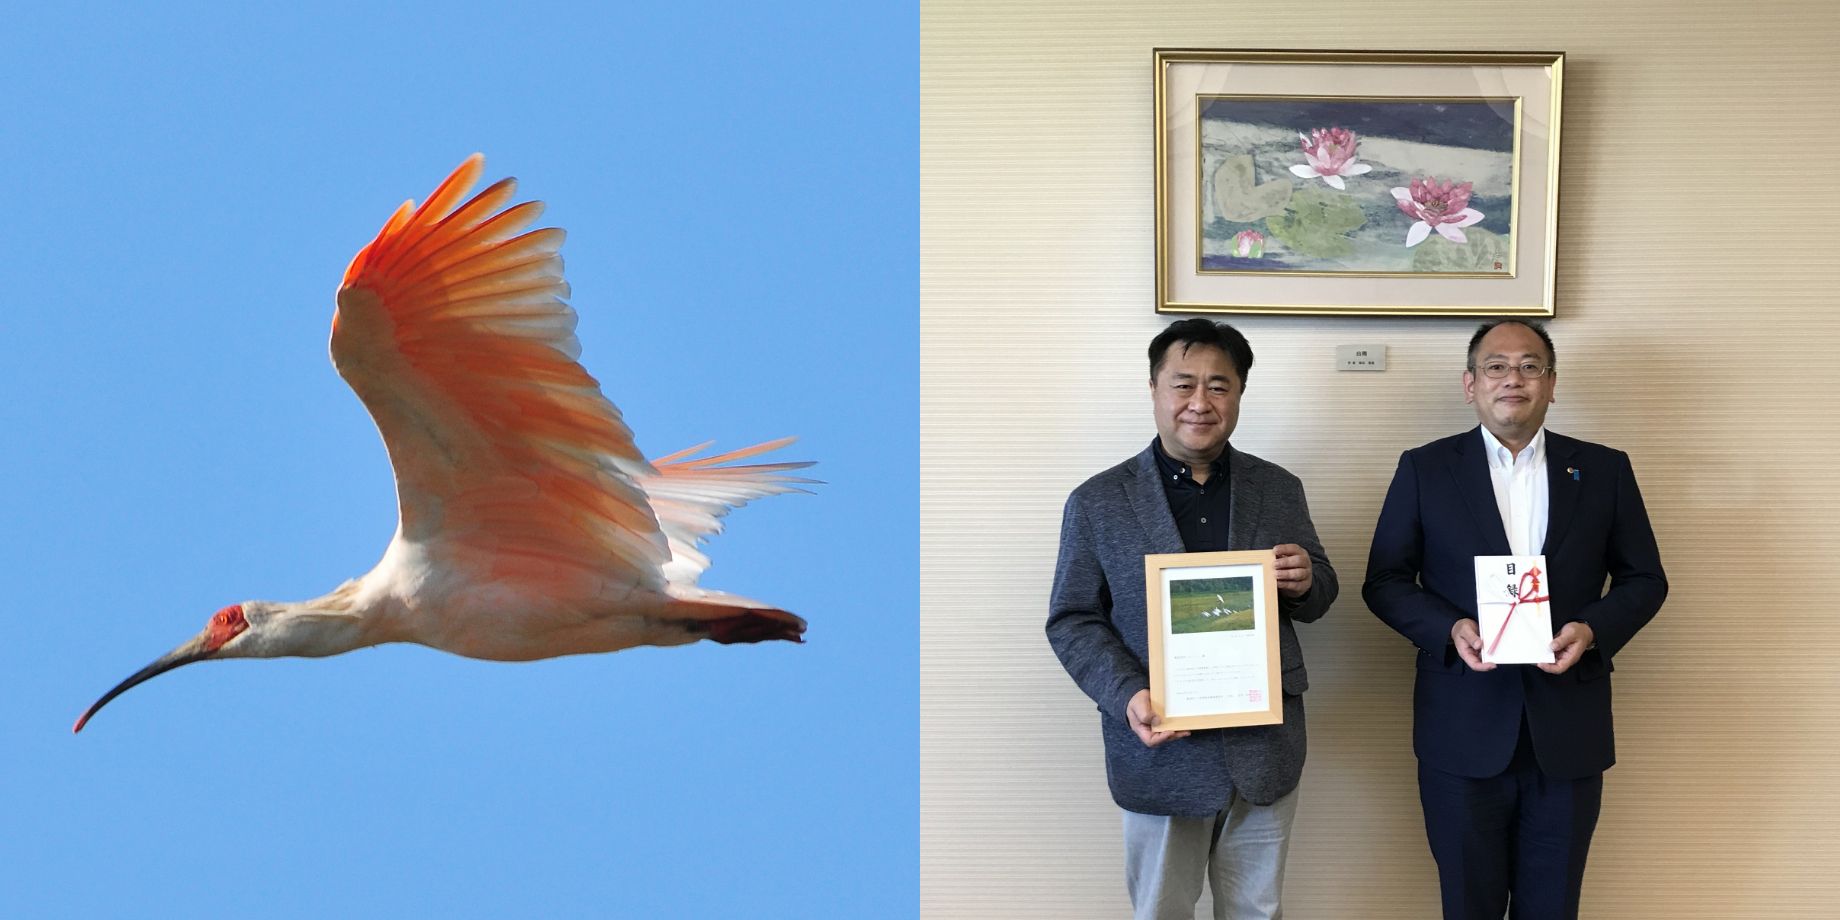 Donation presented to the Niigata Ibis Conservation Fund at the Niigata Prefectural Government (right)